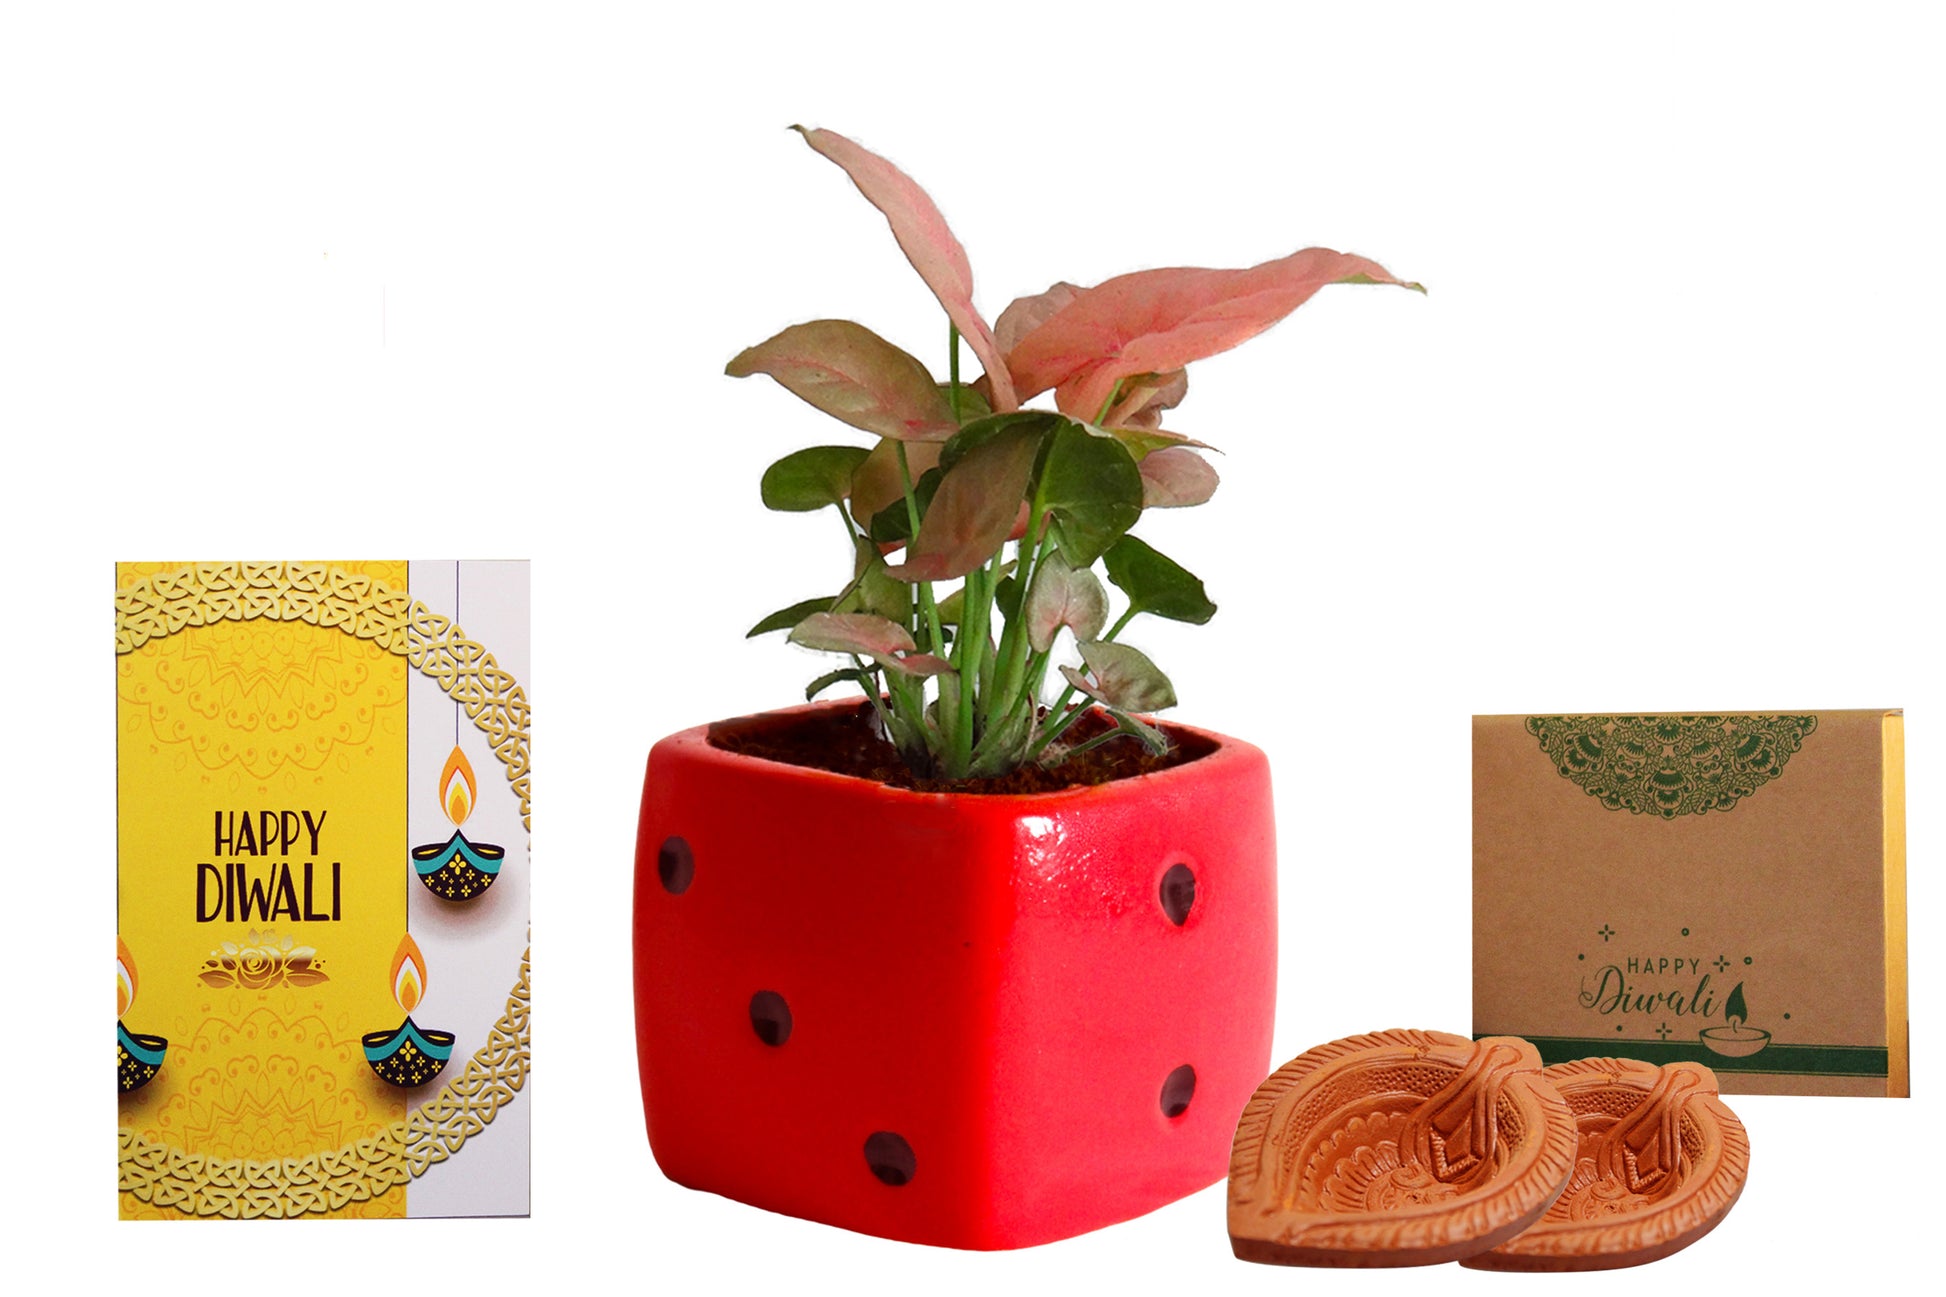 Green, Corporate, Gifts, Plants, Diwali, Brand, logo, Diya, Syngonium, Money, Plant, Indoor, Rolling, Nature, Gifting, Best, India, Eco-Friendly, Pots, ceramic, Planters, Customized